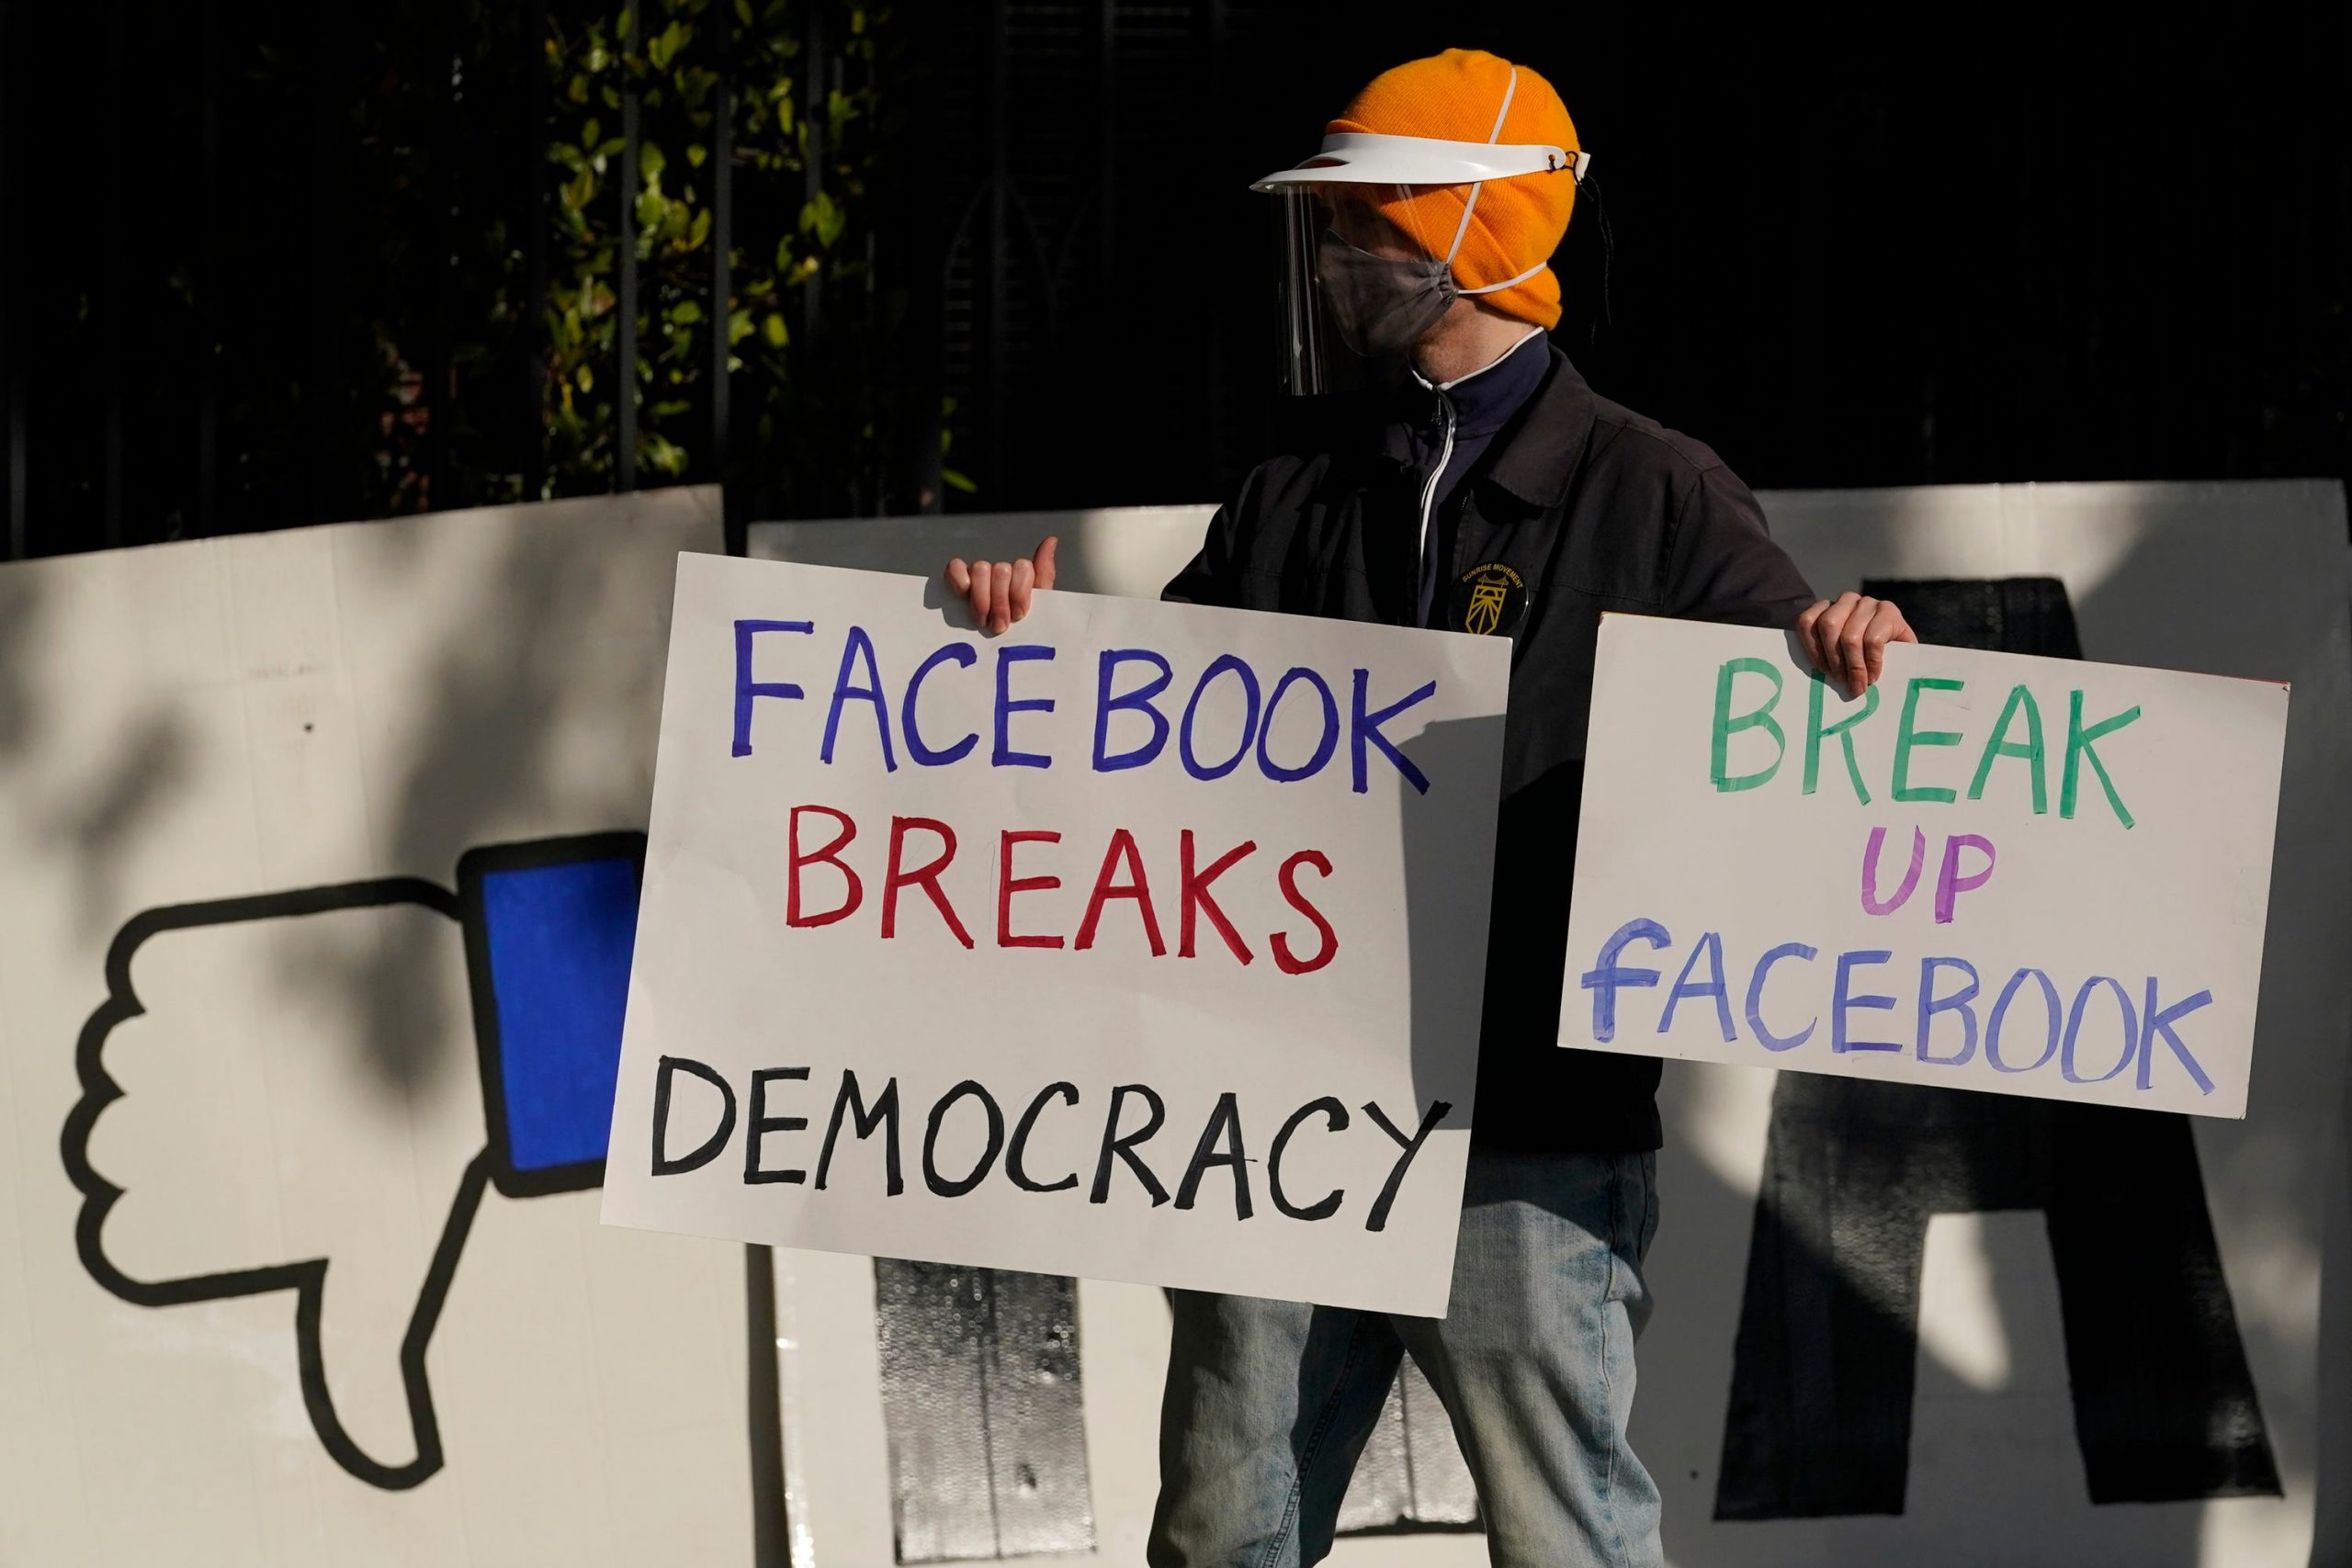 A protestor with a hat and mask holds "Break up Facebook" sign